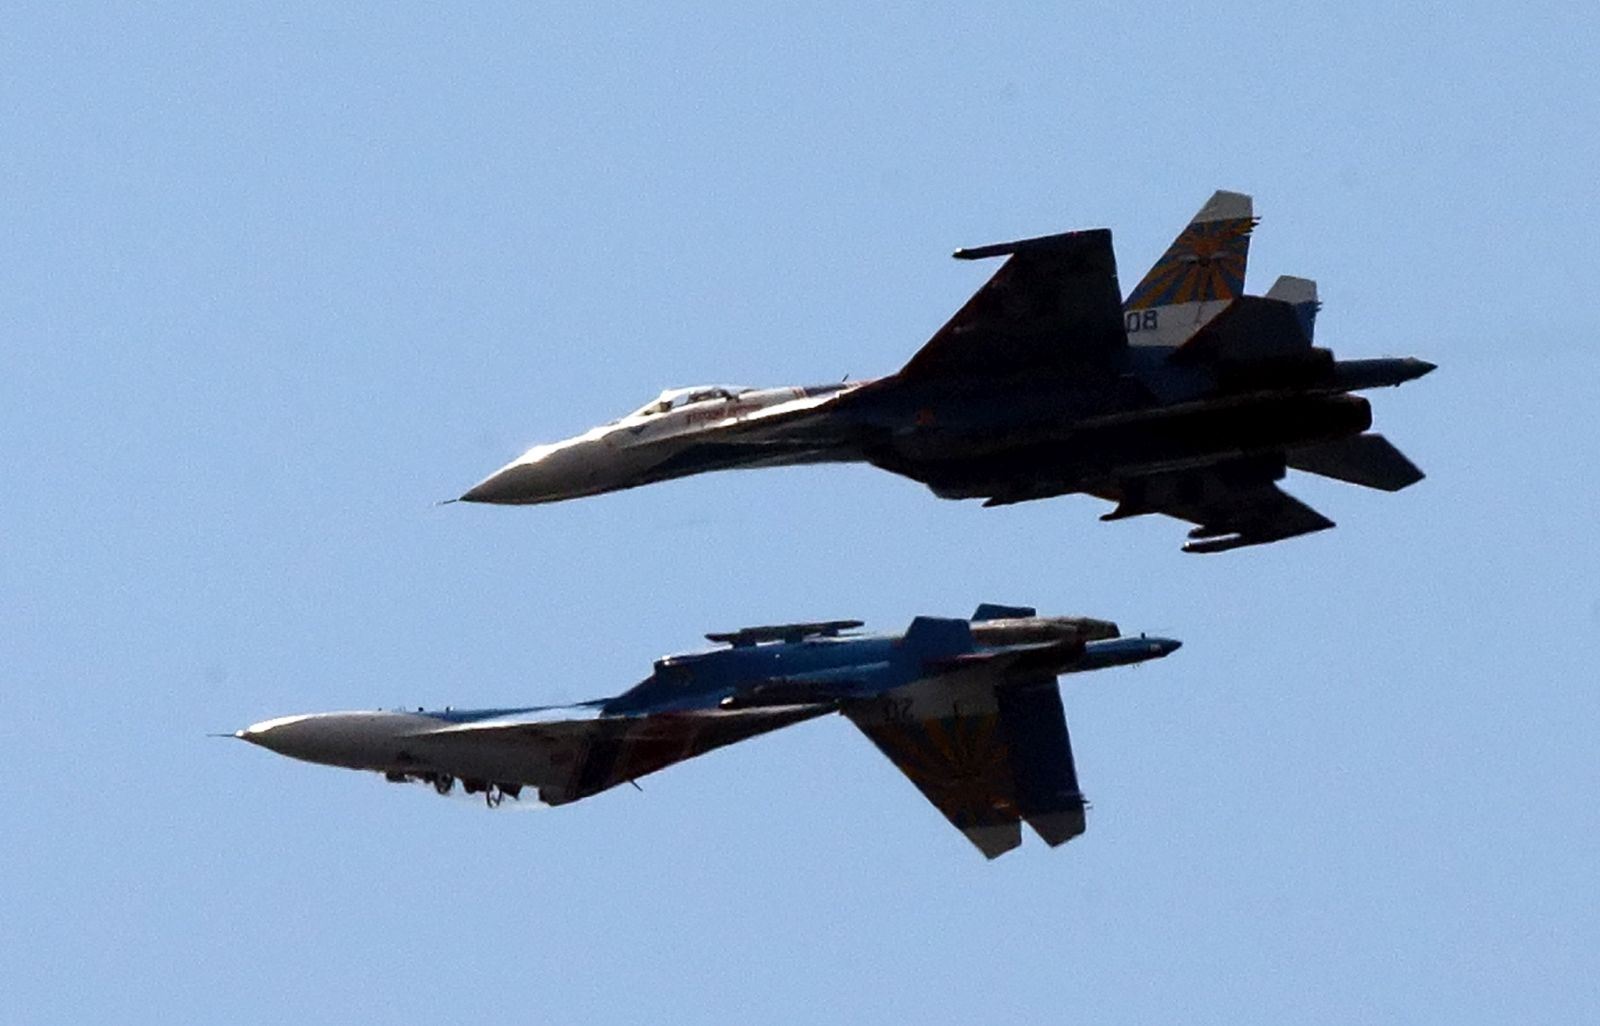 epa10522667 (FILE) - Two Russian SU-27 aircraft perform during the International Maritime Defence Show (IMDS) in St. Petersburg, Russia, 07 July 2013 (reissued 14 March 2023). The United States European Command (EUCOM) said in a statement that two Russian Su-27 aircraft 'conducted an unsafe and unprofessional intercept' with a US unmanned MQ-9 aircraft that was operating within international airspace over the Black Sea on 14 March 2023. The incident occurred at about 7:03 AM (CET) when one of the Russian aircraft struck the propeller of the MQ-9 causing US forces to bring the unmanned aircraft down in international waters, the statement added.  EPA/ANATOLY MALTSEV *** Local Caption *** 50908986